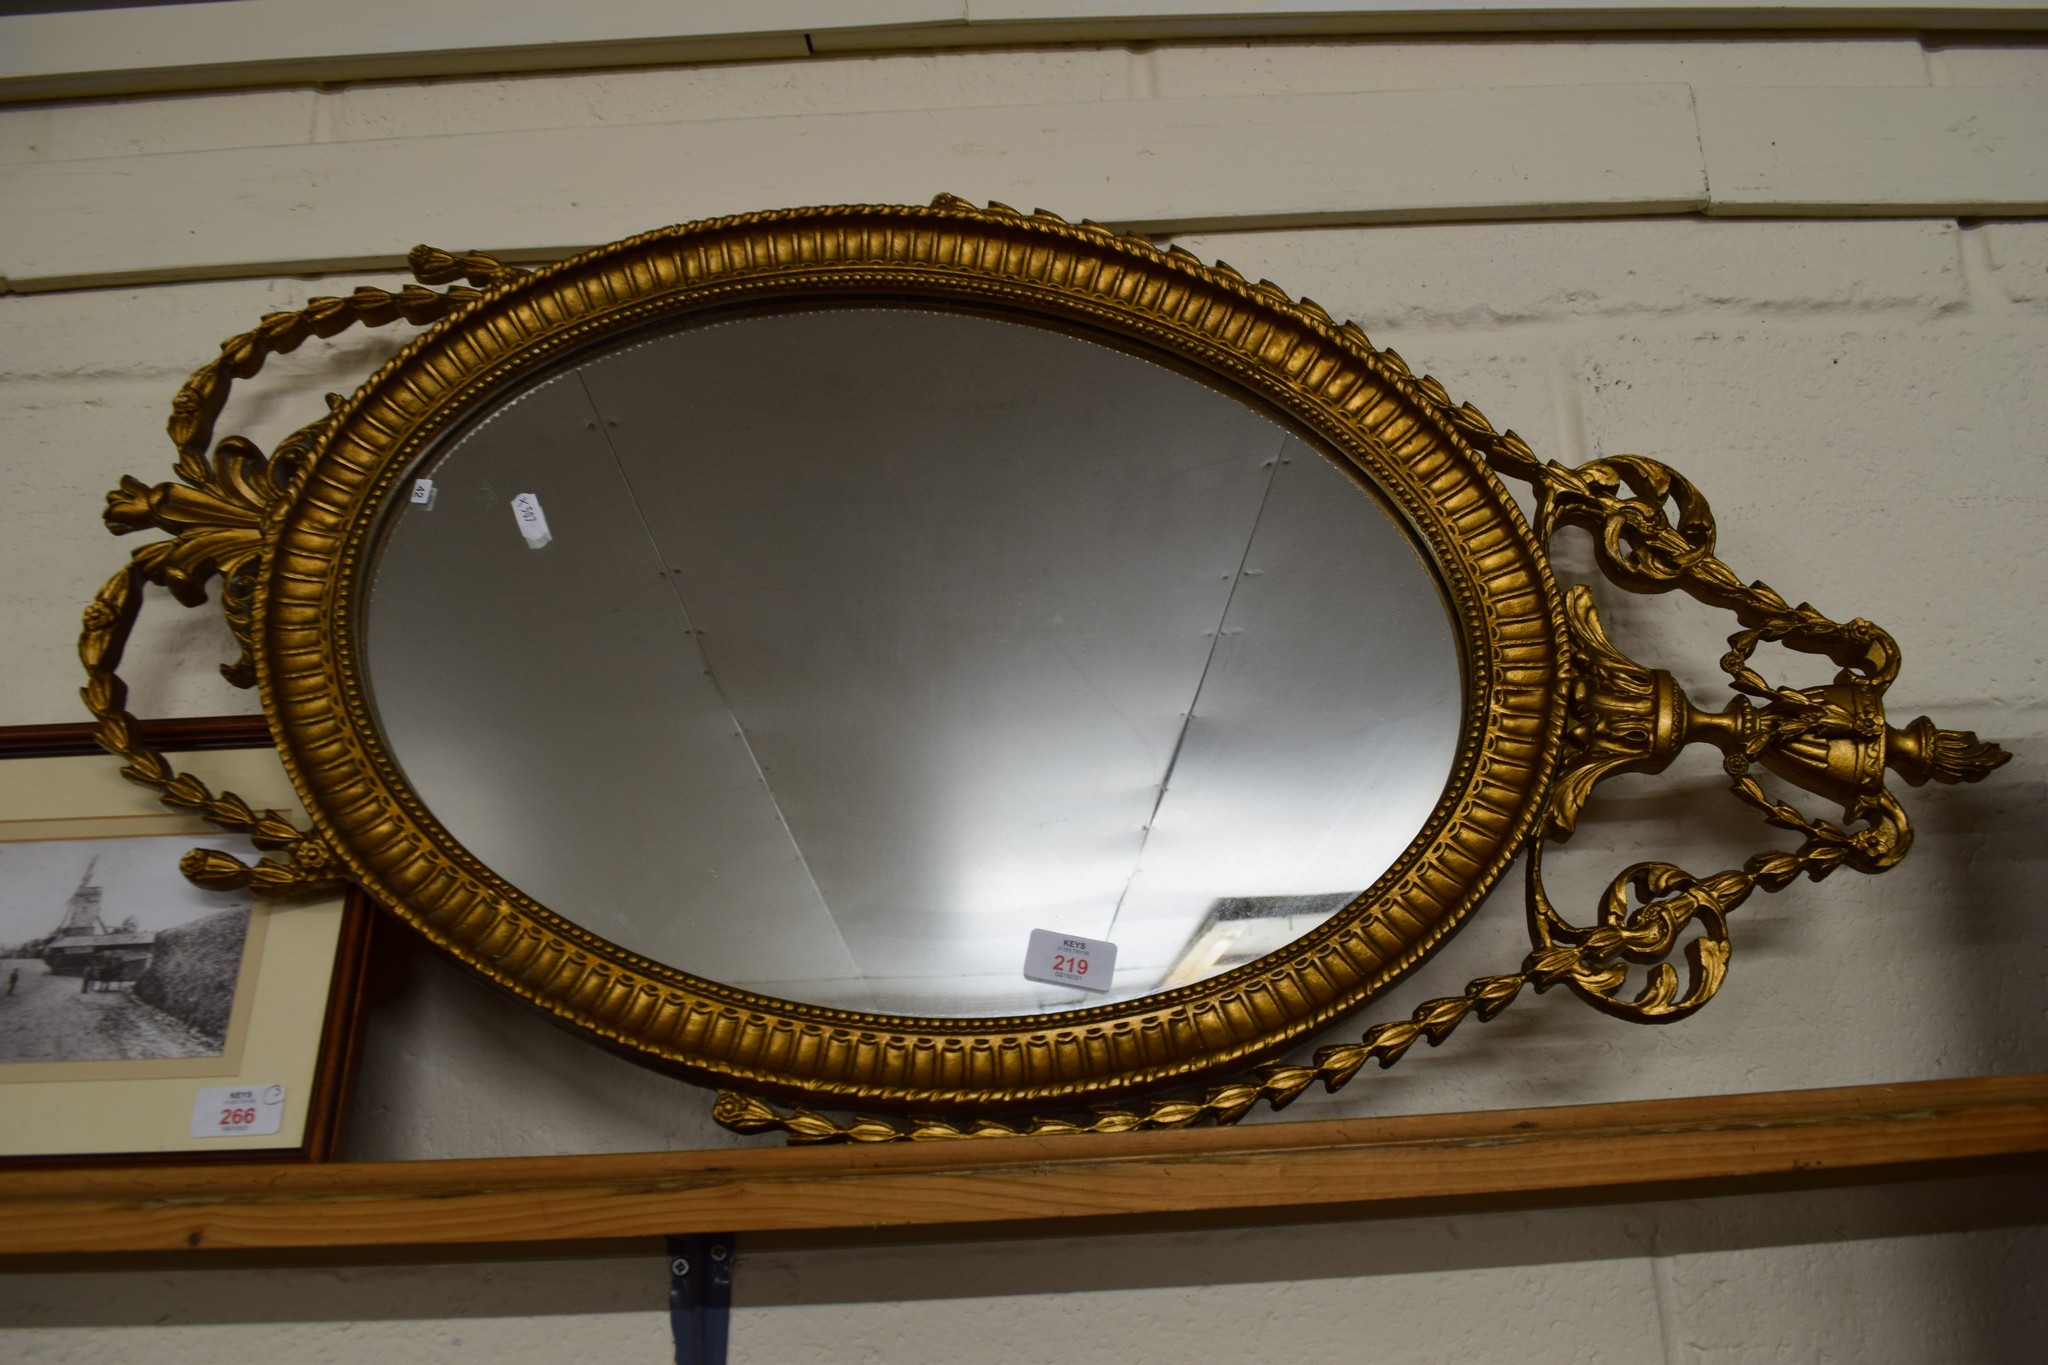 OVAL MIRROR IN GILT FRAME